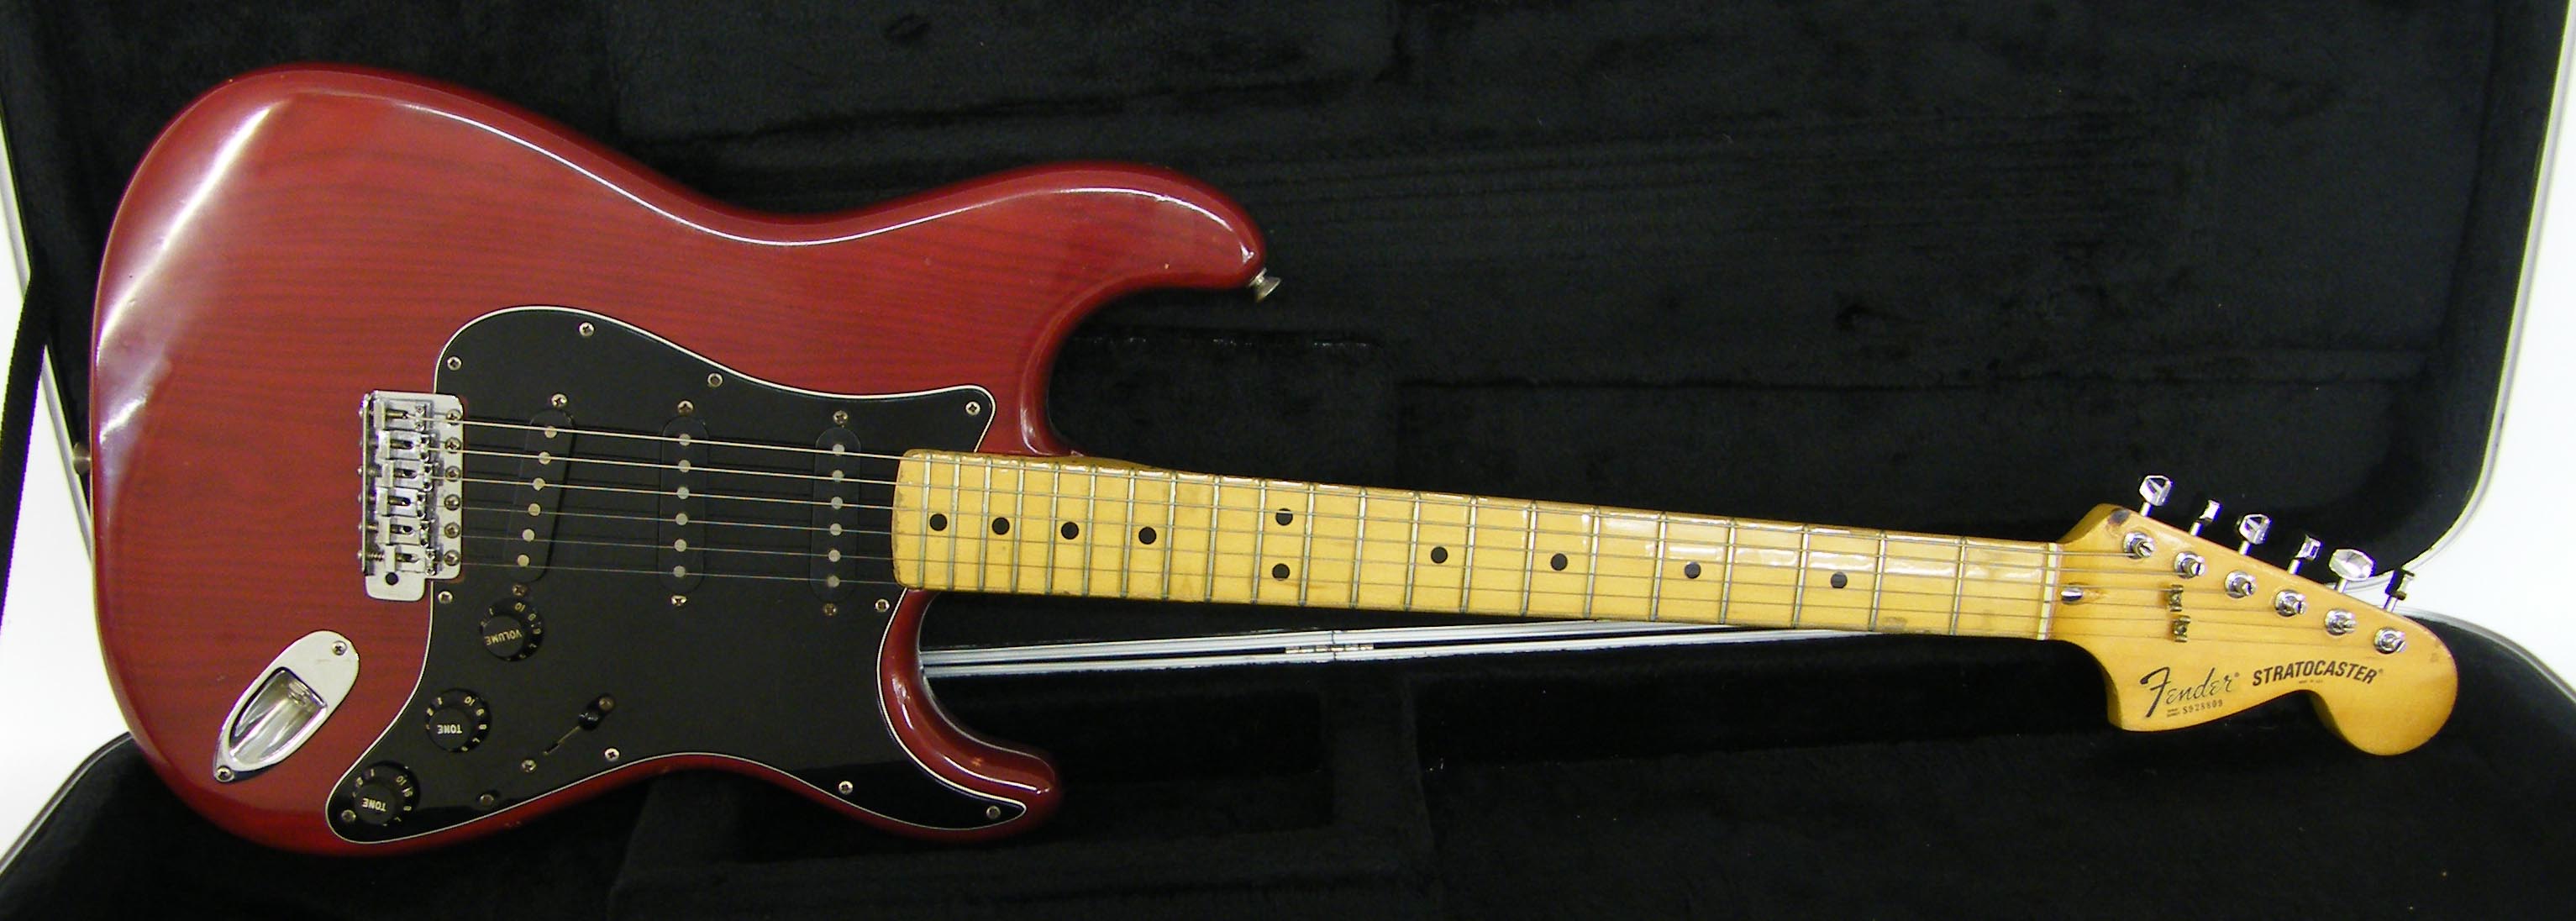 1979 Fender Stratocaster electric guitar, made in USA, ser. no. F928809, transparent red finish with